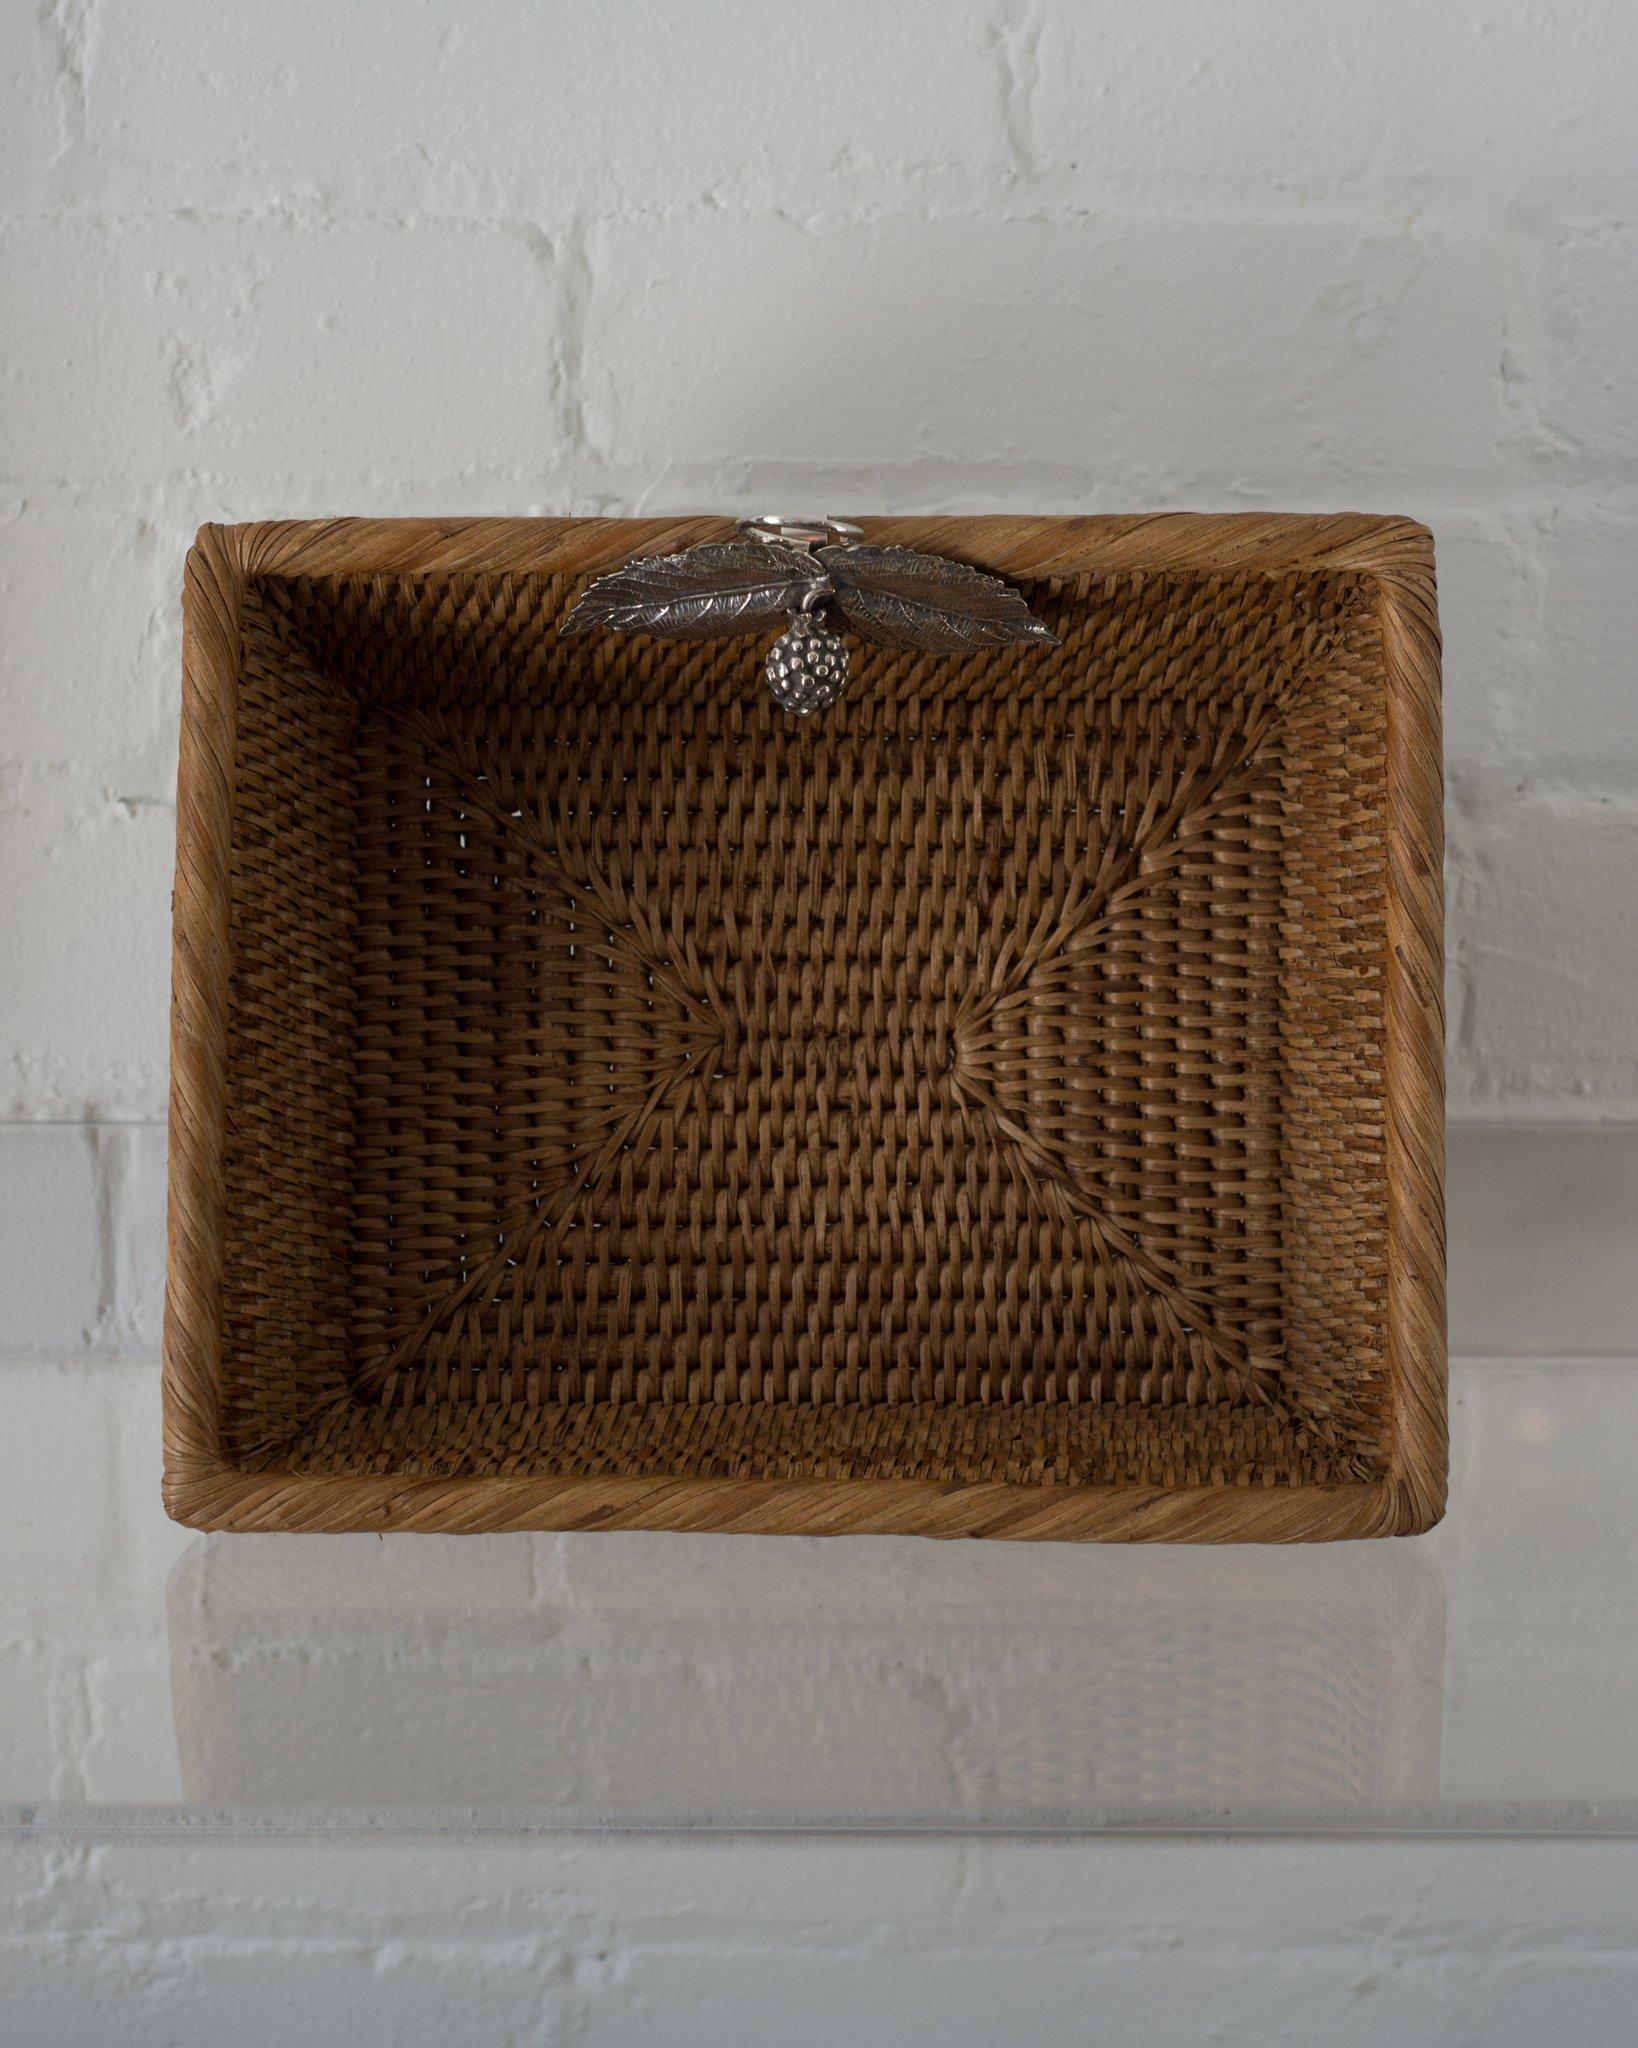 A contemporary rattan rectangular basket with 925 sterling silver leaves and a berry, handmade in Porto.